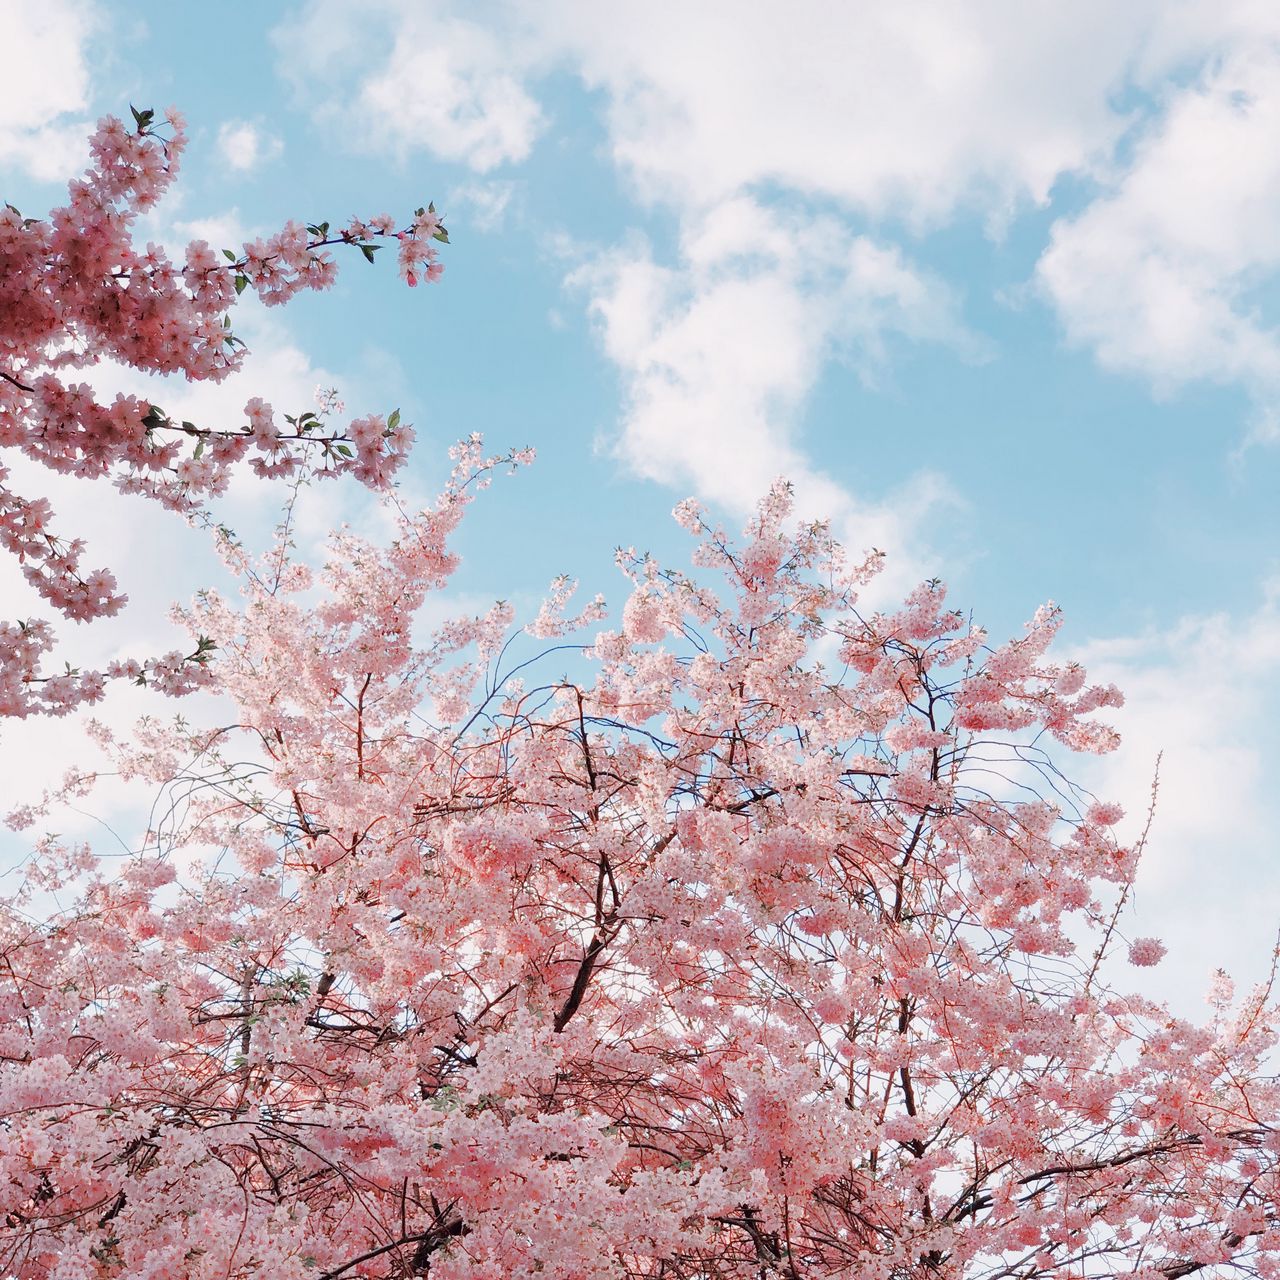 Download wallpaper 1280x1280 cherry, bloom, spring, flowers, branches, sky ipad, ipad ipad mini for parallax HD background